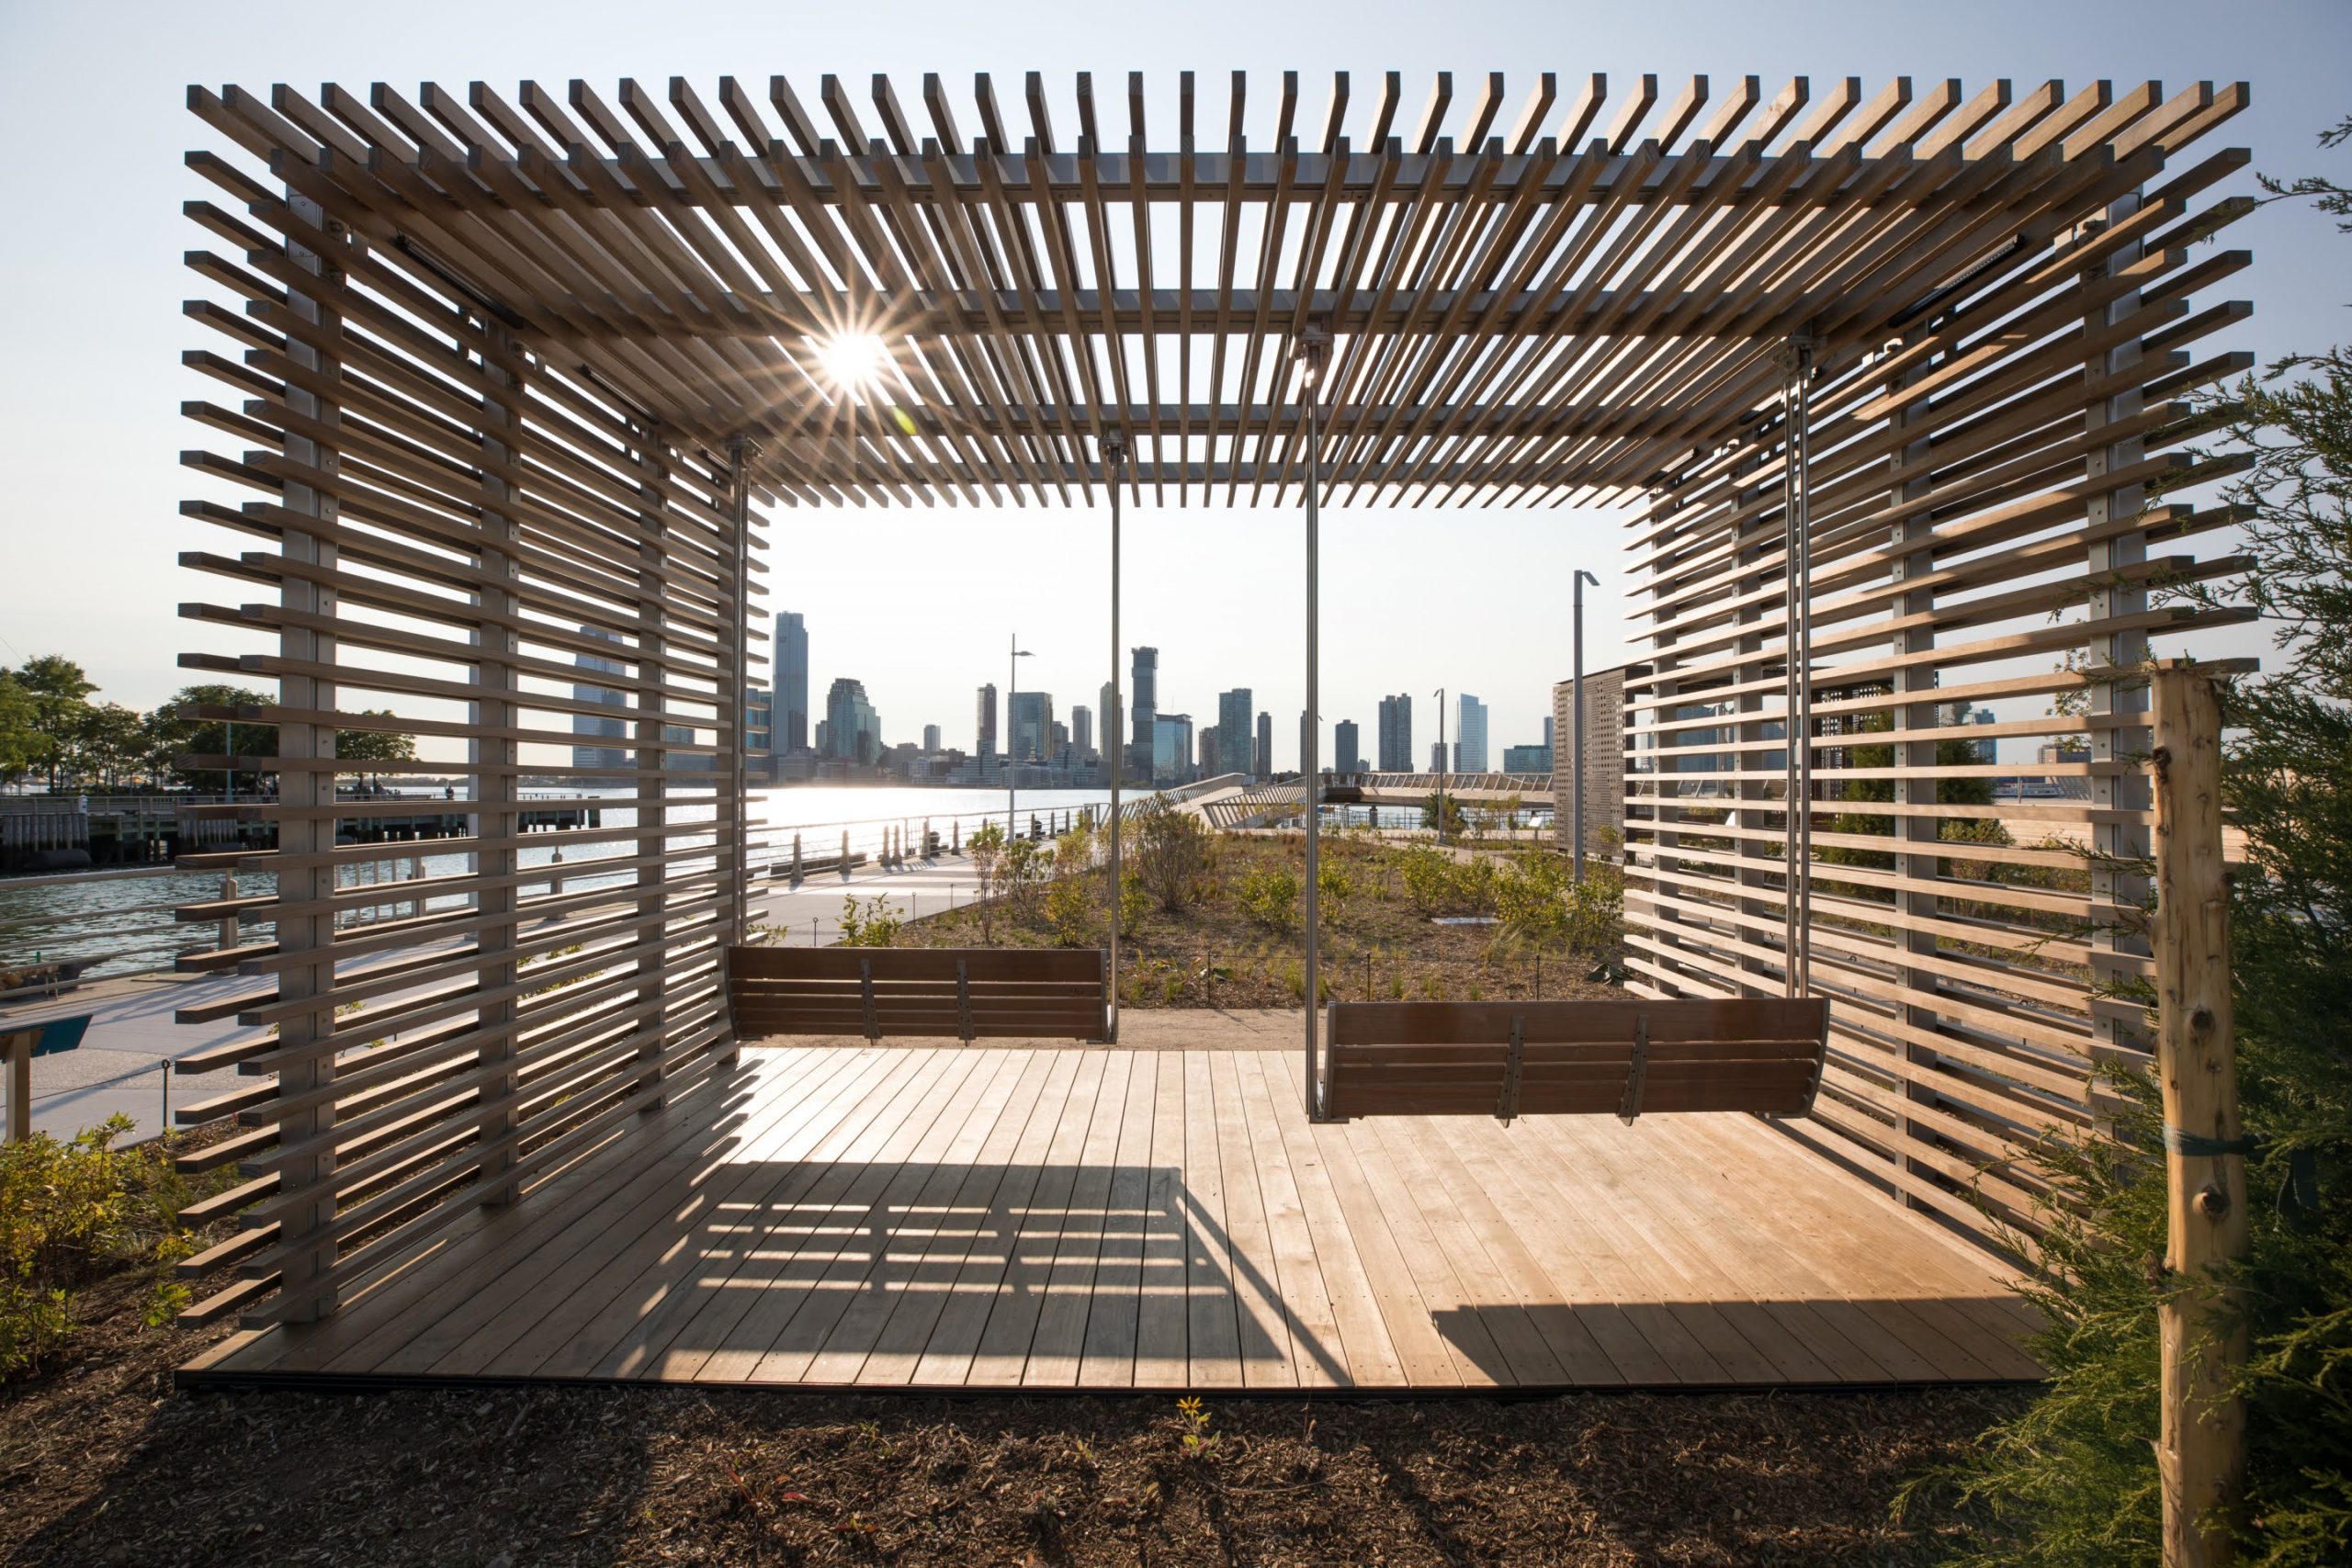 Two bench swings with a slatted roof over look the Hudson River at Pier 26 during the day at Hudson River Park in New York City New York features kebony modified wood Clear Boardwalk Decking.